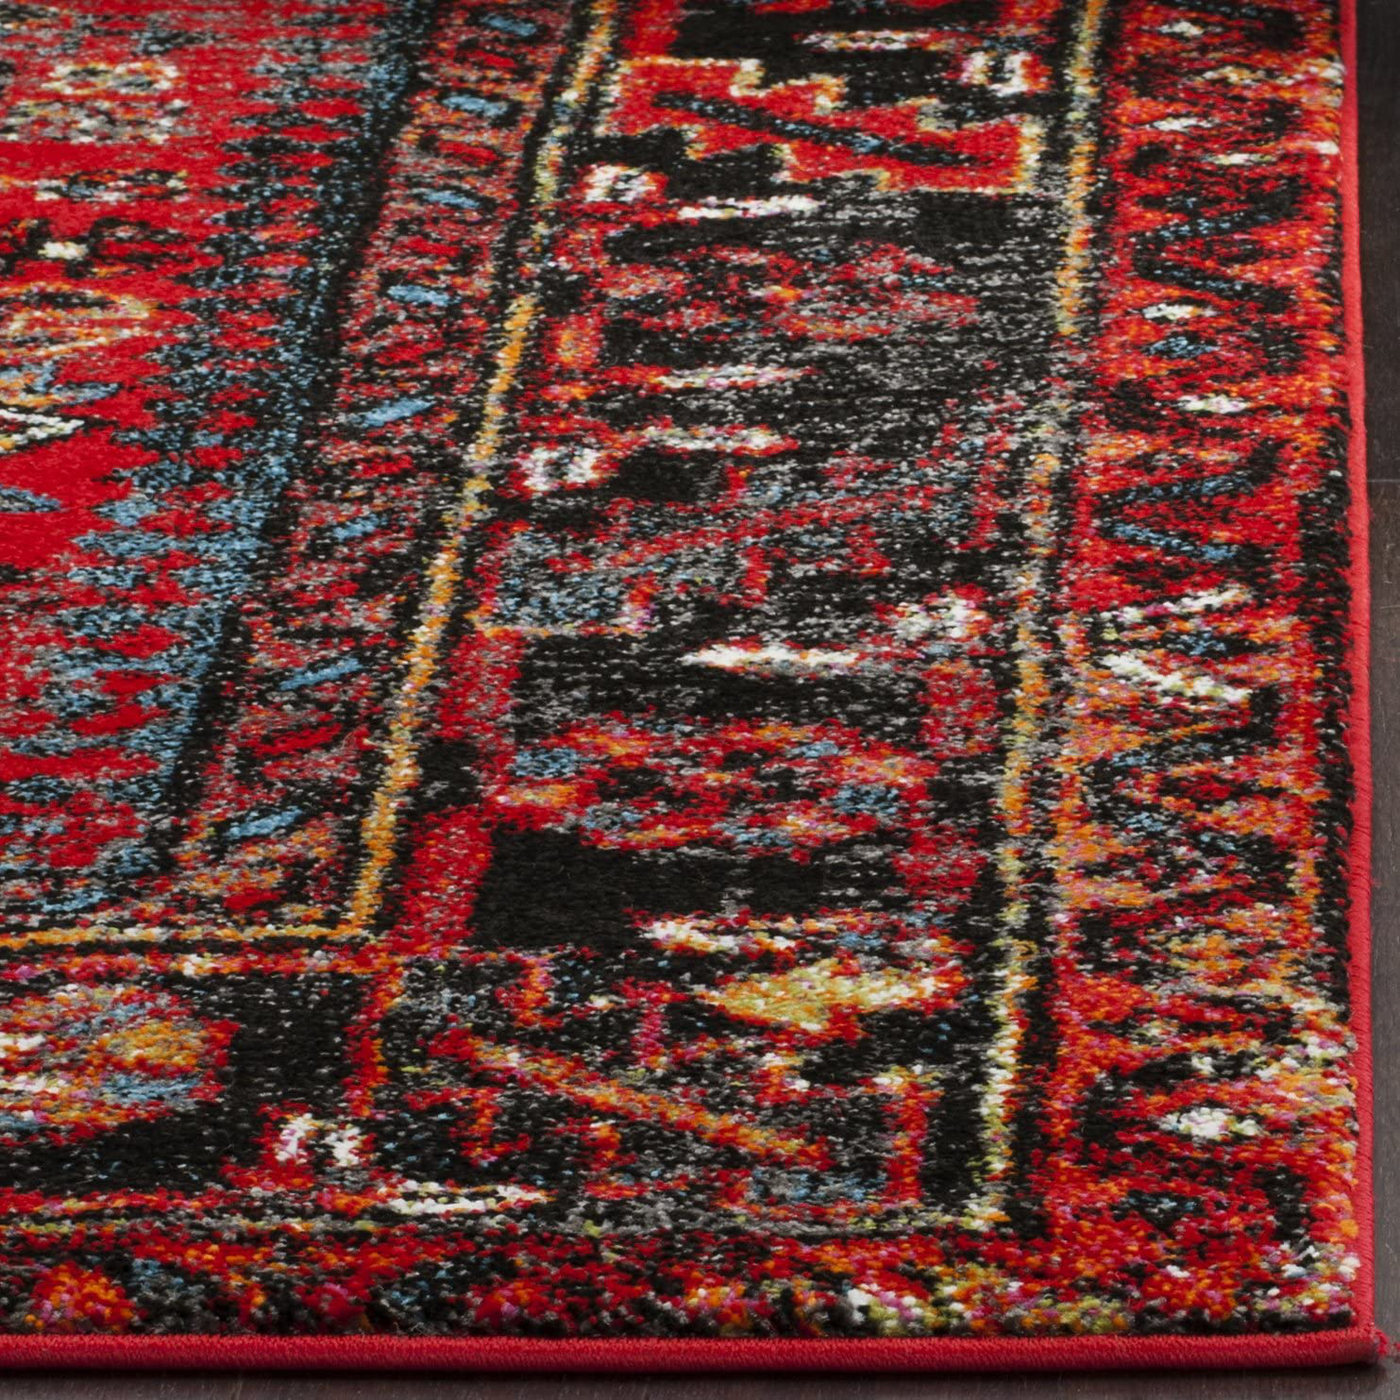 Safavieh Vintage Hamadan Collection VTH211A Oriental Traditional Persian Non-Shedding Stain Resistant Living Room Bedroom Runner, 2'3" x 12' , Red / Multi